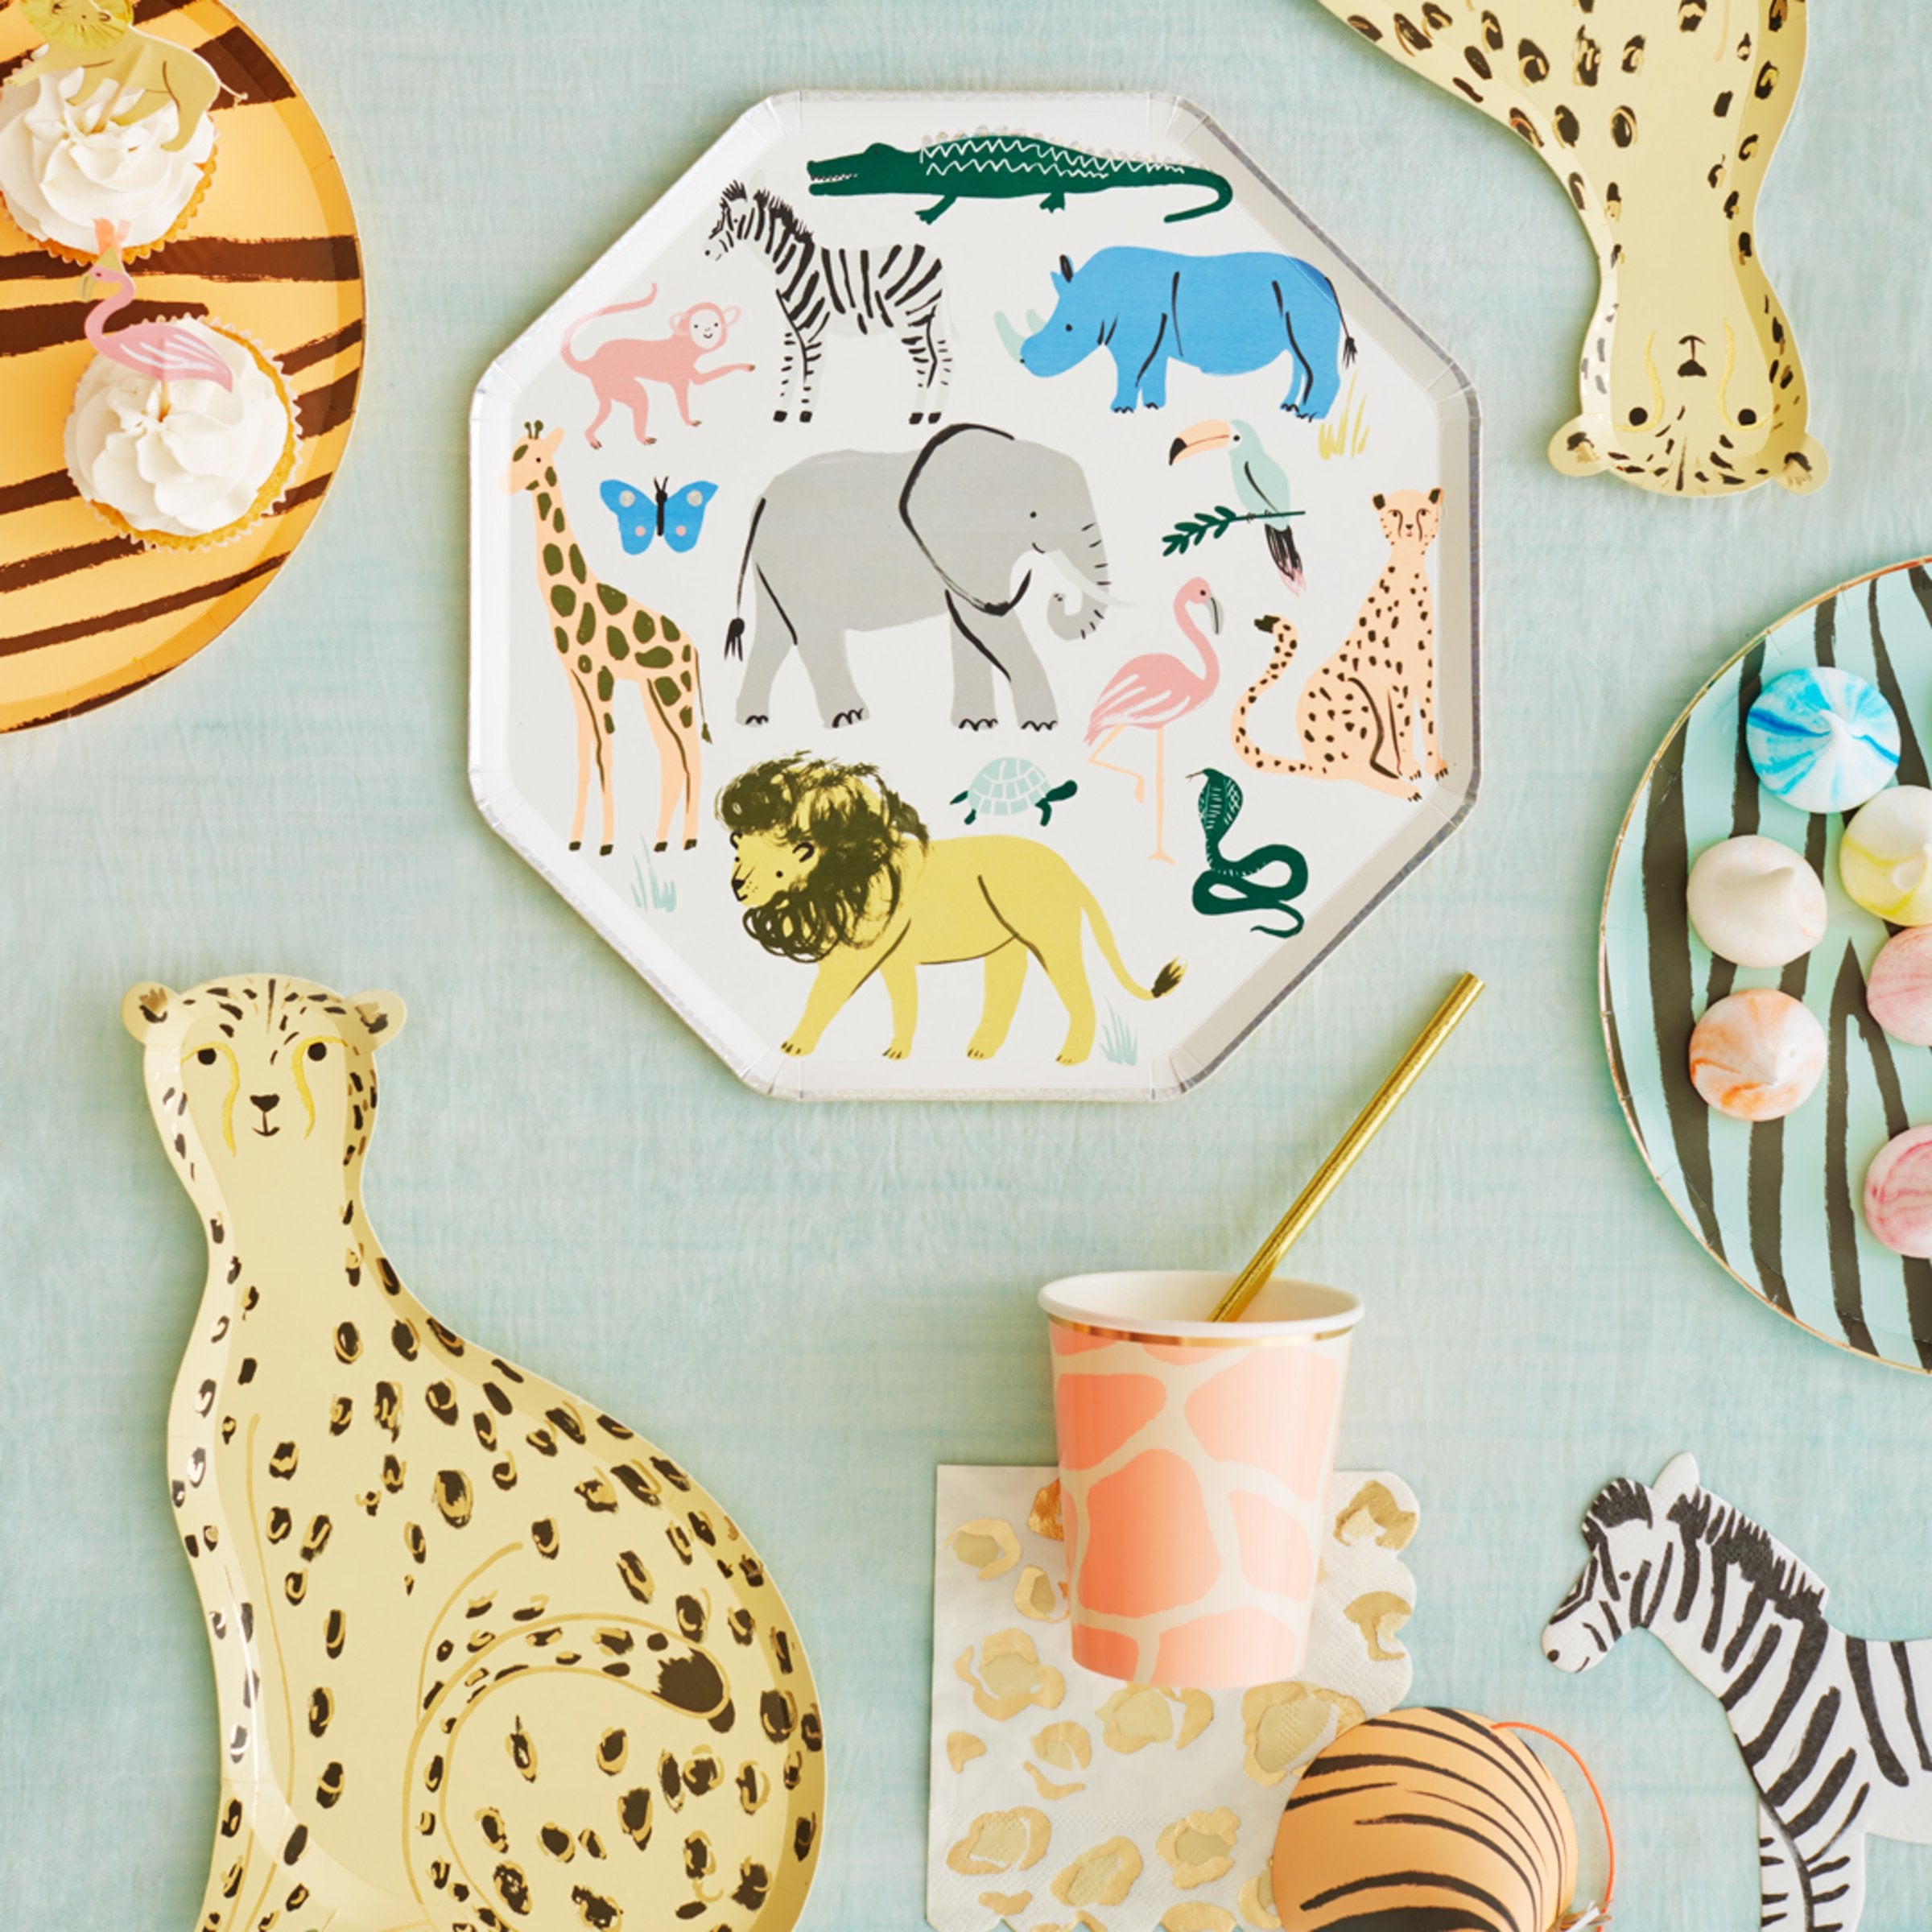 No safari party would be complete without our special animal plates.